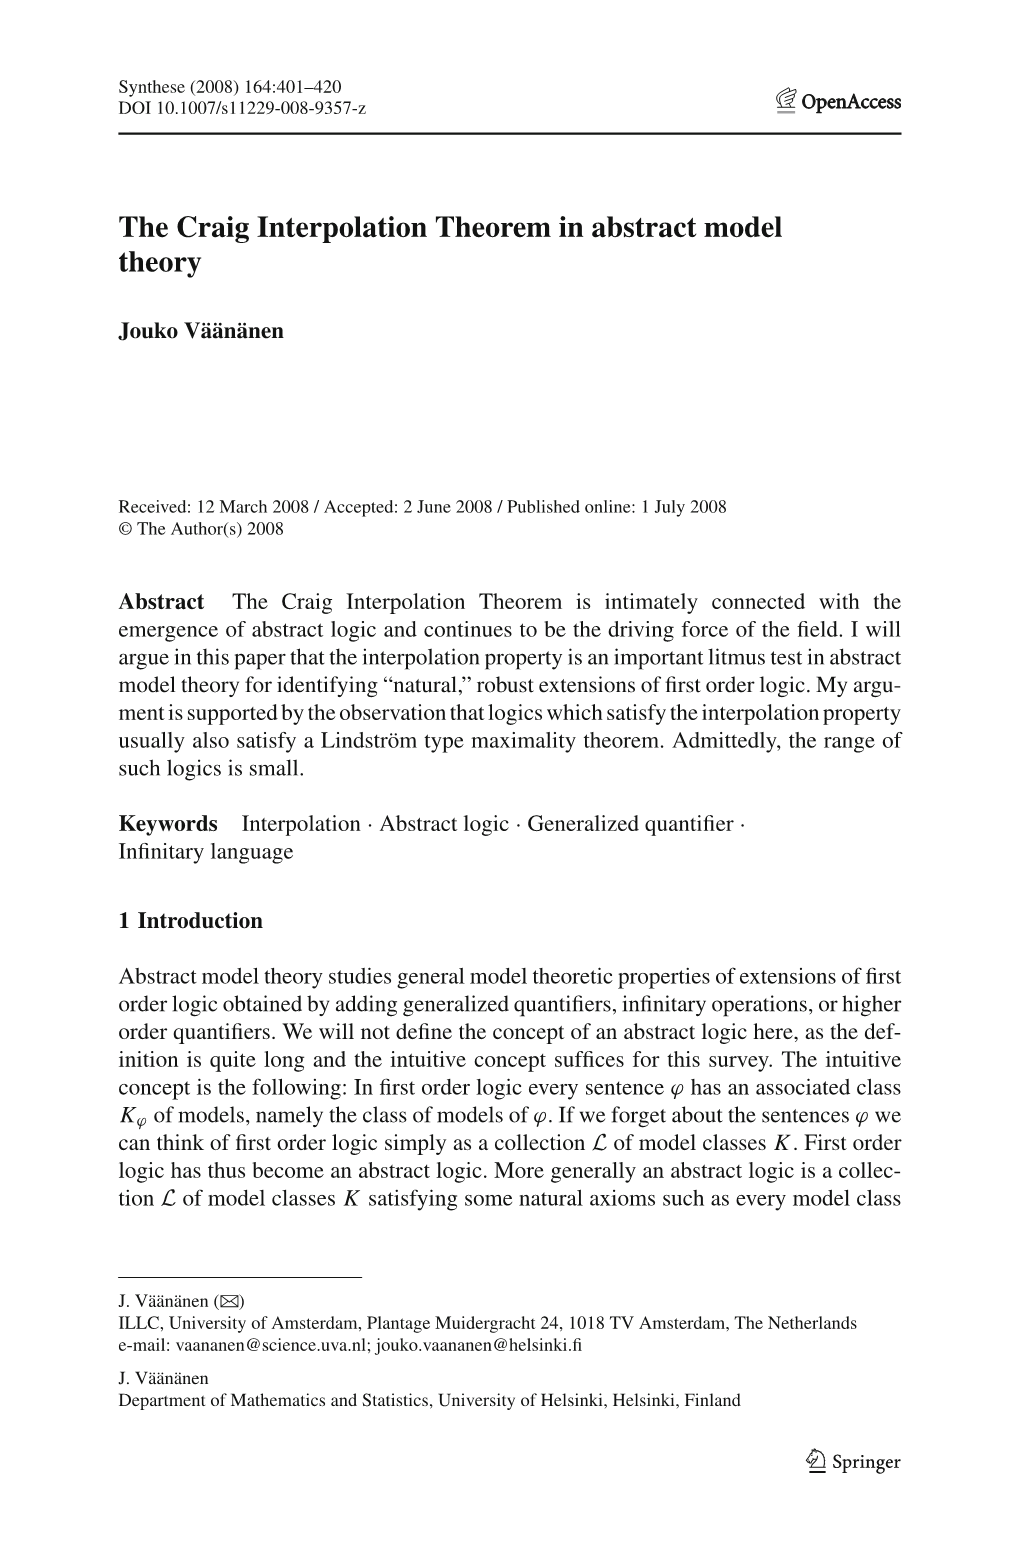 The Craig Interpolation Theorem in Abstract Model Theory